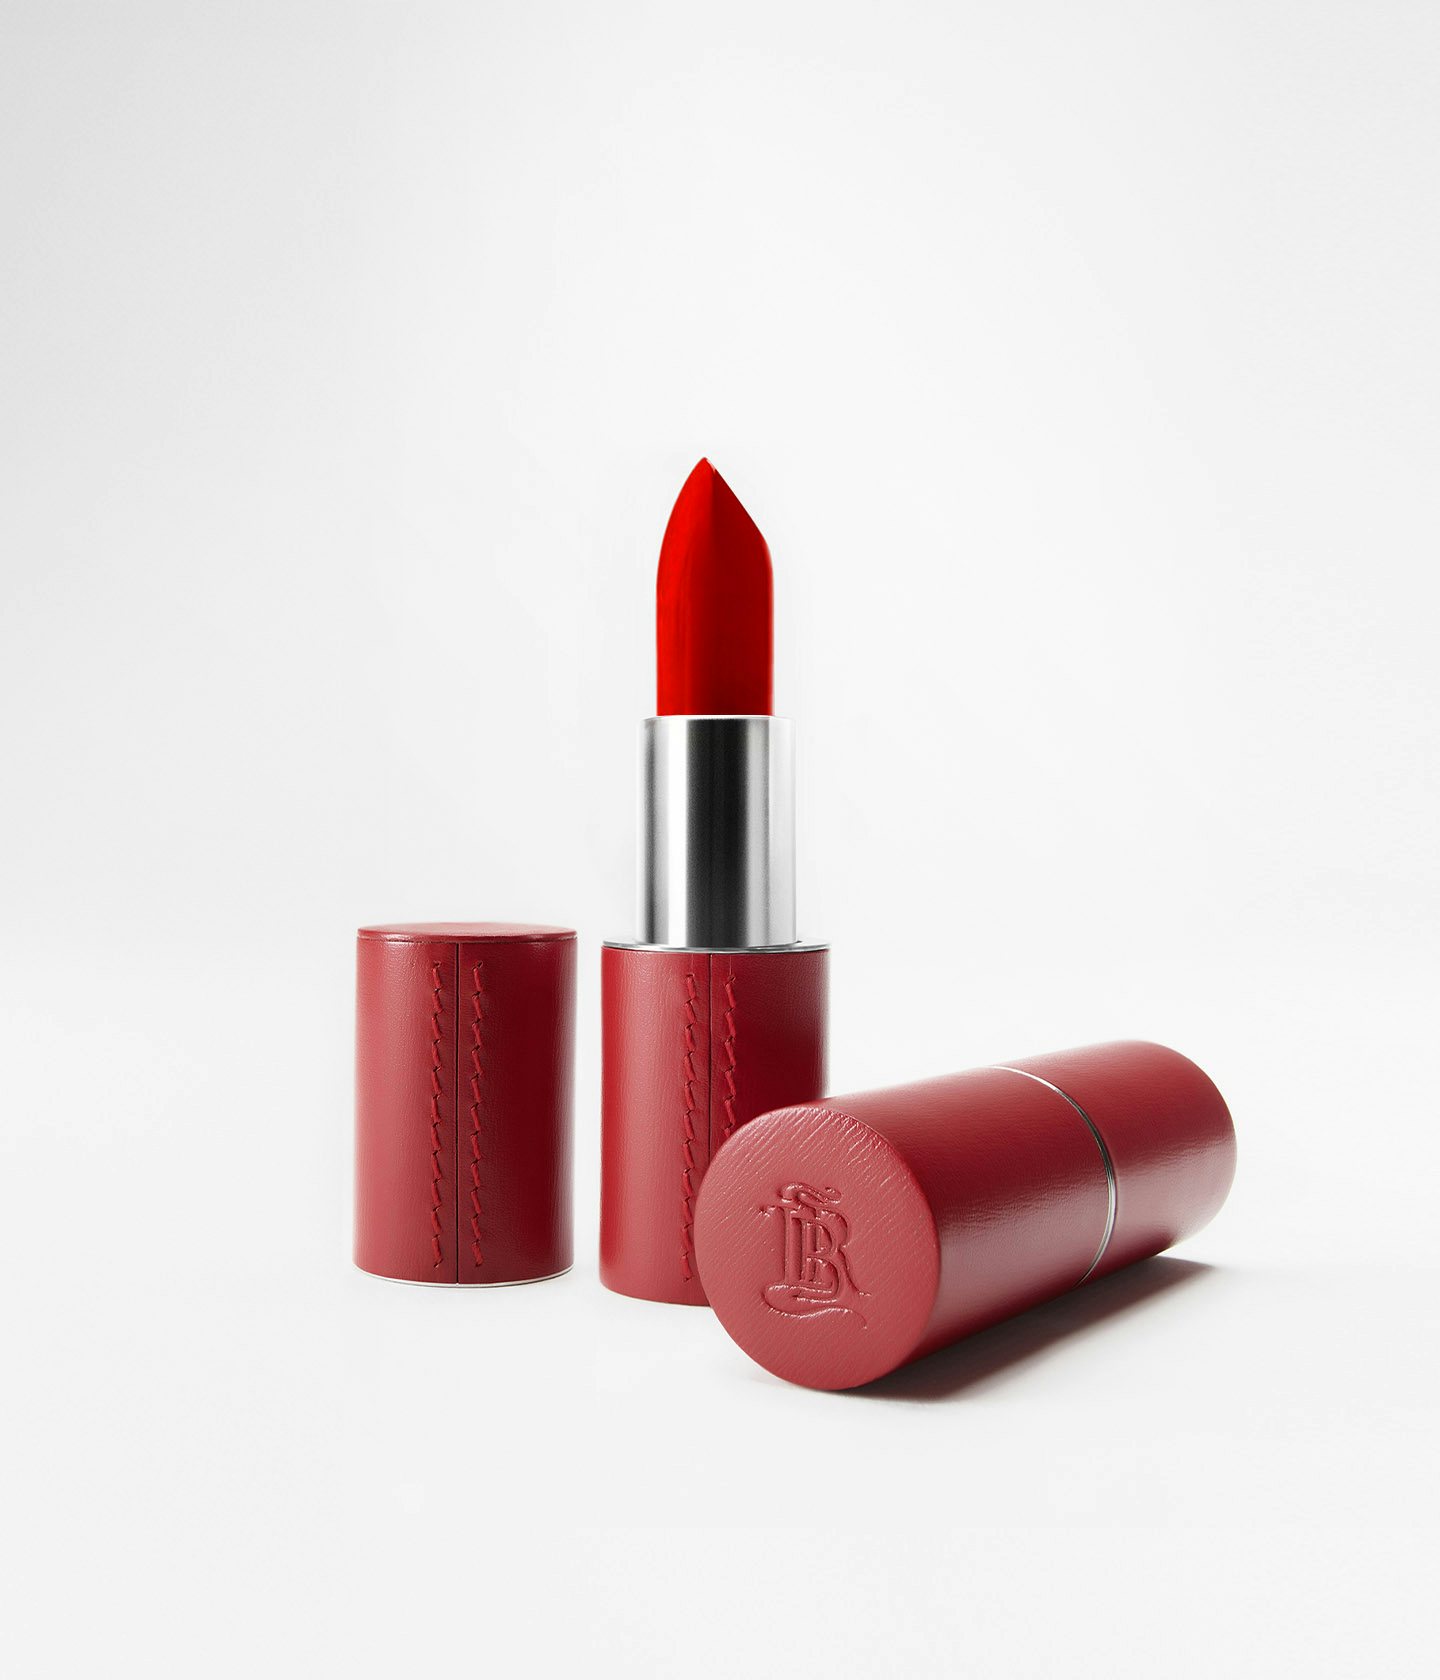 La bouche rouge Pop Art Red lipstick shade in the red leather case 